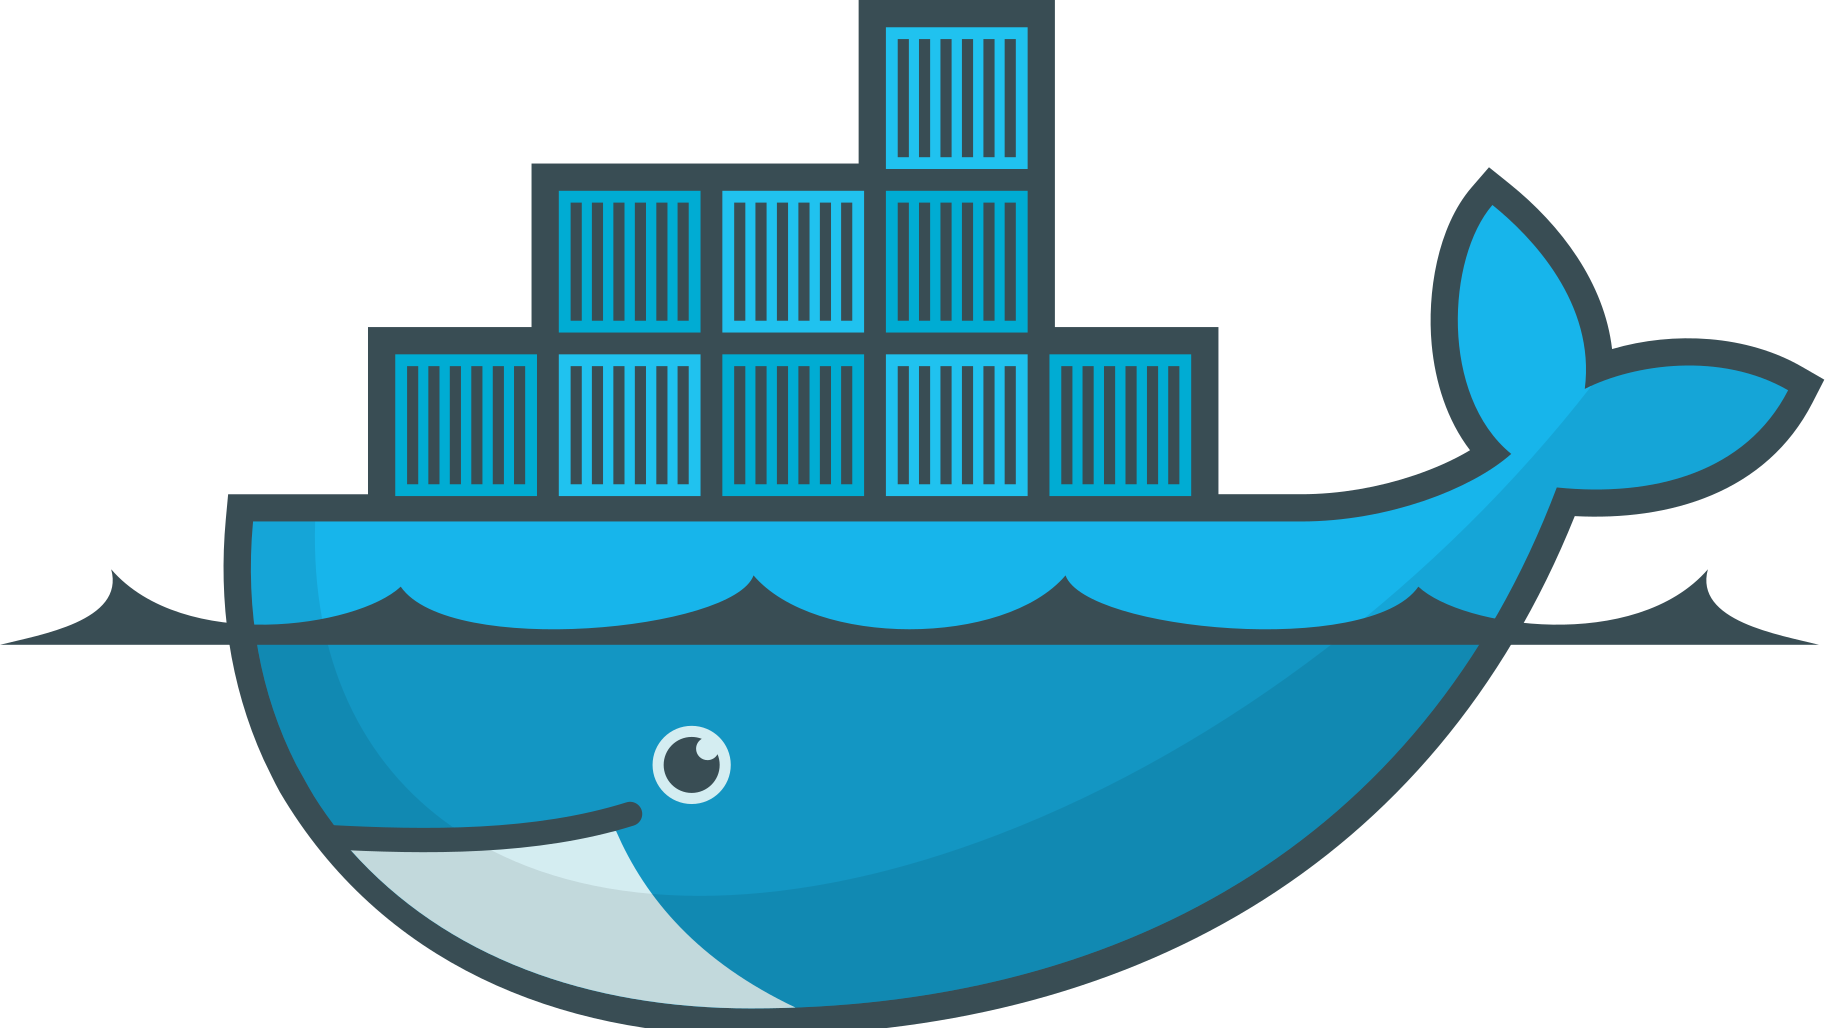 Docker_(container_engine)_logo_only